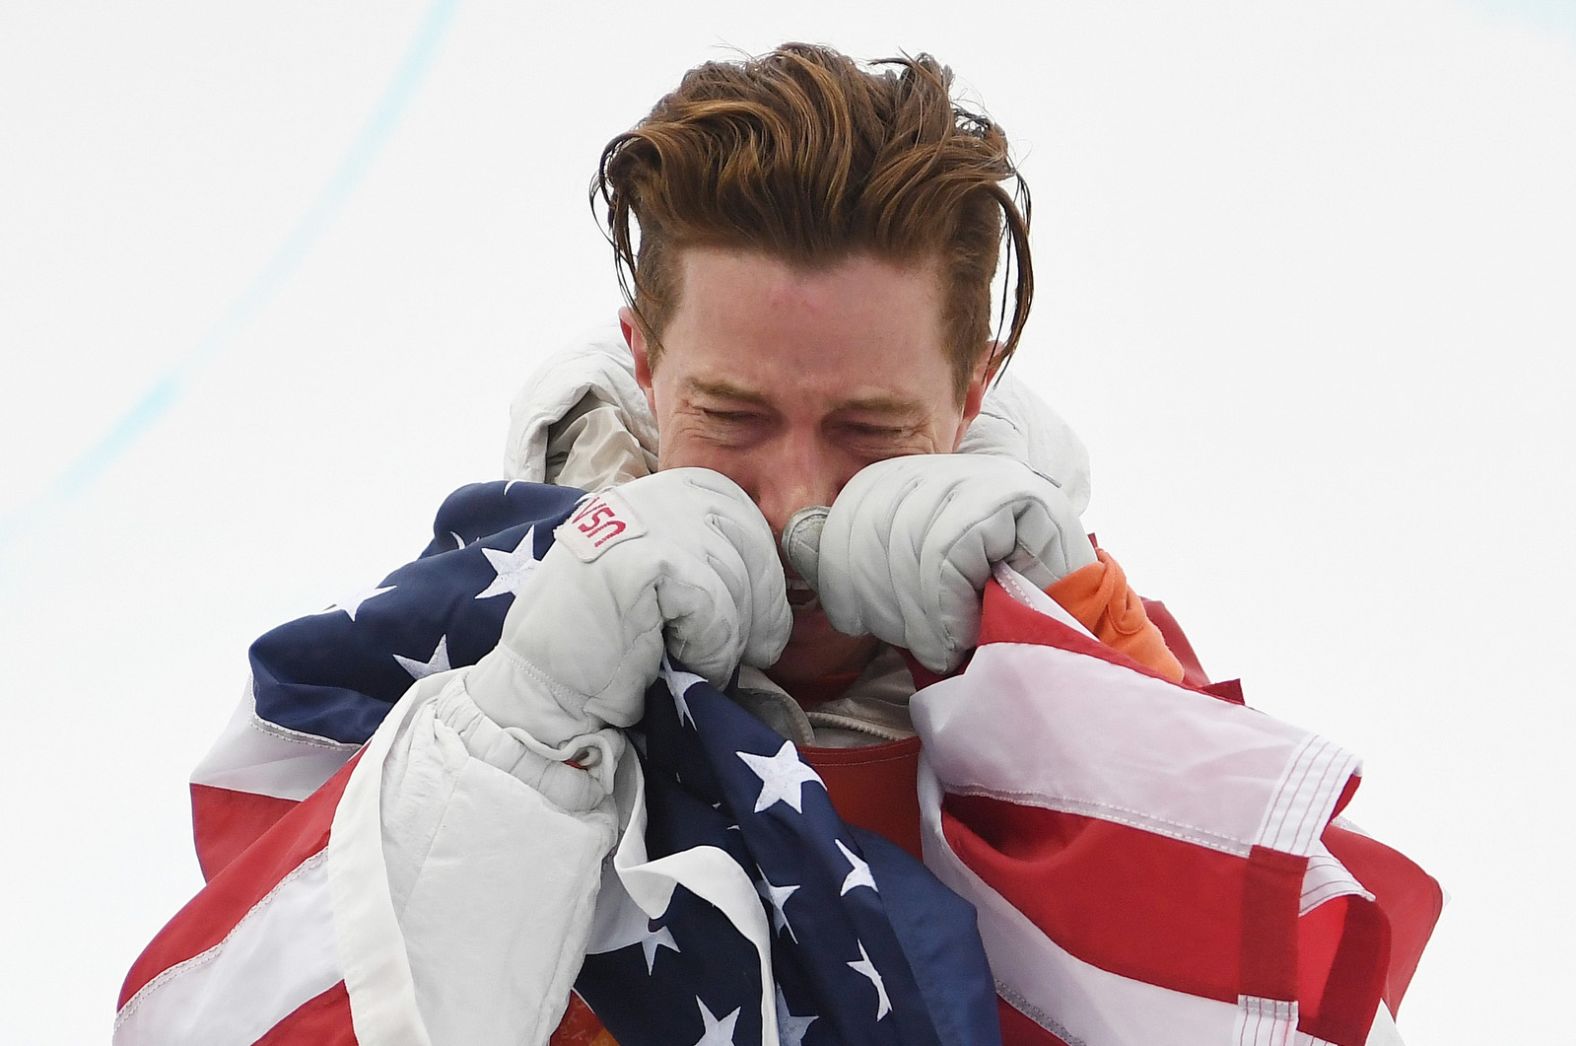 White breaks out into tears after winning the halfpipe at the 2018 Winter Olympics in South Korea. White trailed Japan's Ayumu Hirano going into his last run — the final run of the entire competition. But with all the pressure on him, <a href="index.php?page=&url=https%3A%2F%2Fwww.cnn.com%2F2018%2F02%2F14%2Fsport%2Fcnn-photos-shaun-white-gold-medal-moment%2Findex.html" target="_blank">White came through with a near-perfect score of 98.50.</a> It was his third gold in four Olympics.